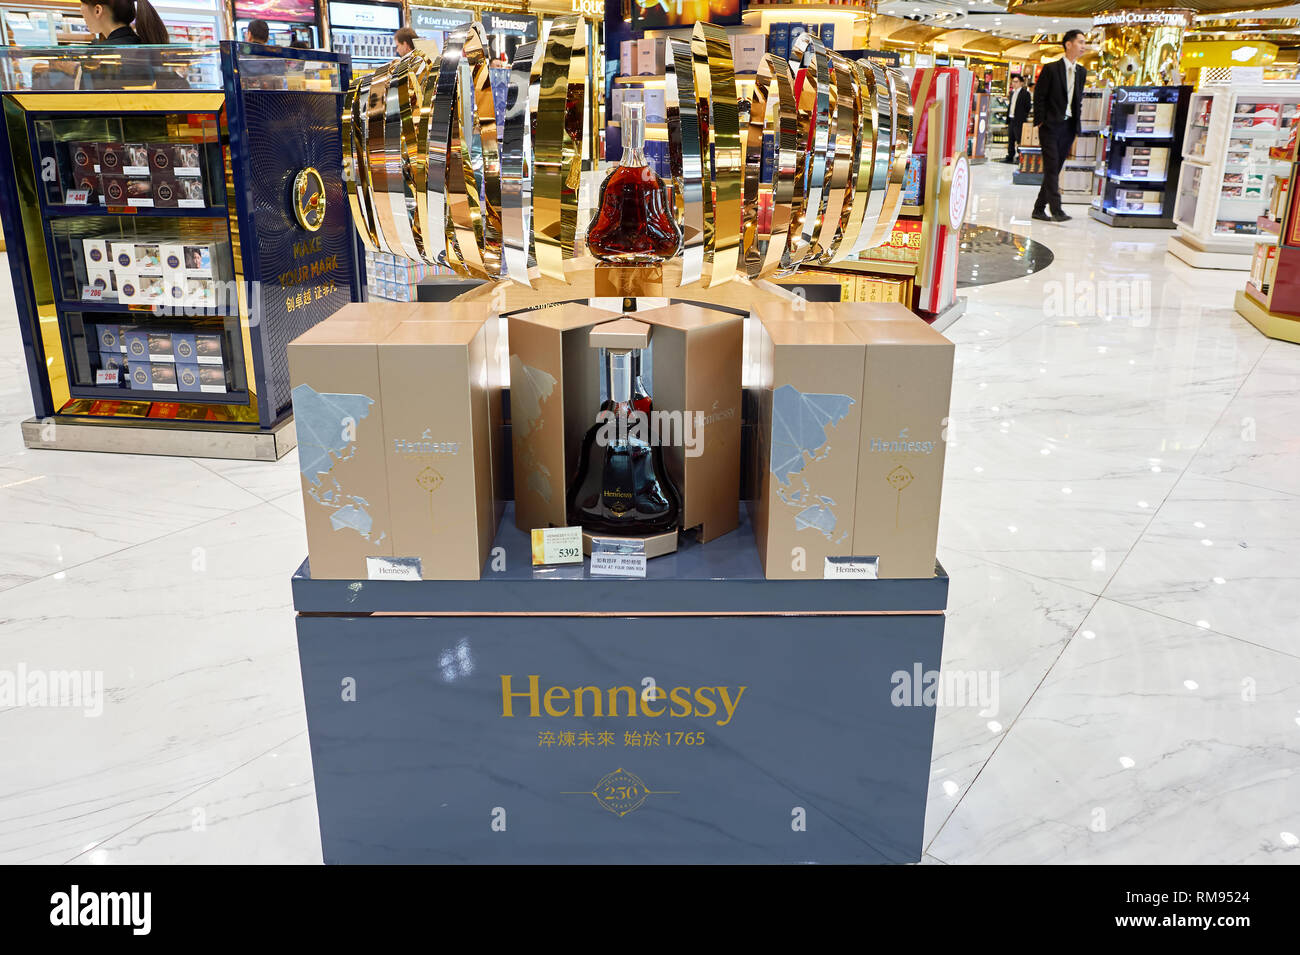 MACAO - CIRCA FEBRUARY, 2016: Hennessy bottle displayed in a store at Macao International Airport. Hennessy, is a cognac house with headquarters in Co Stock Photo